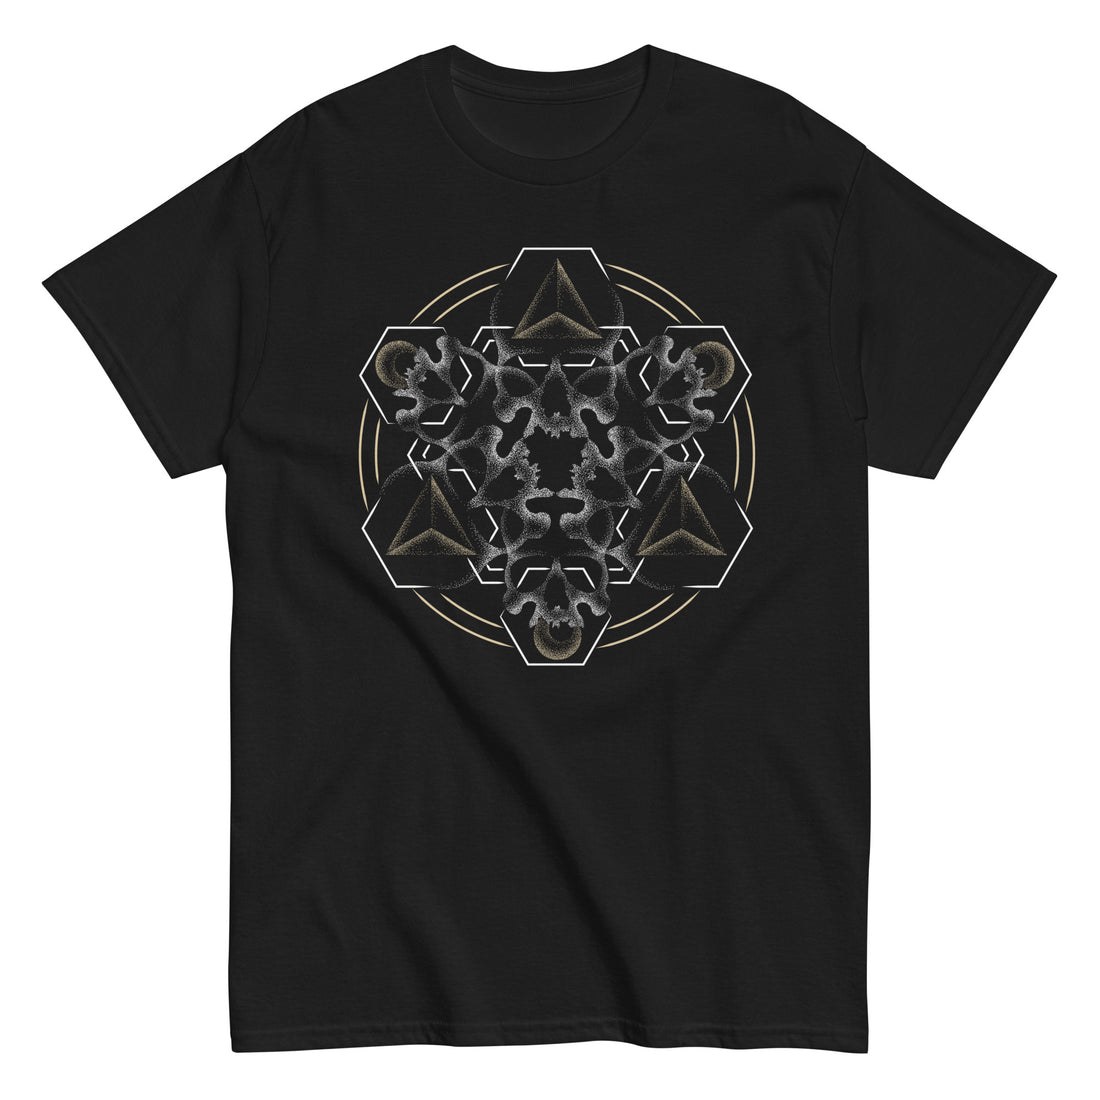 A black t-shirt with a mandala built from white dot work skulls and gold and white geometric shapes.